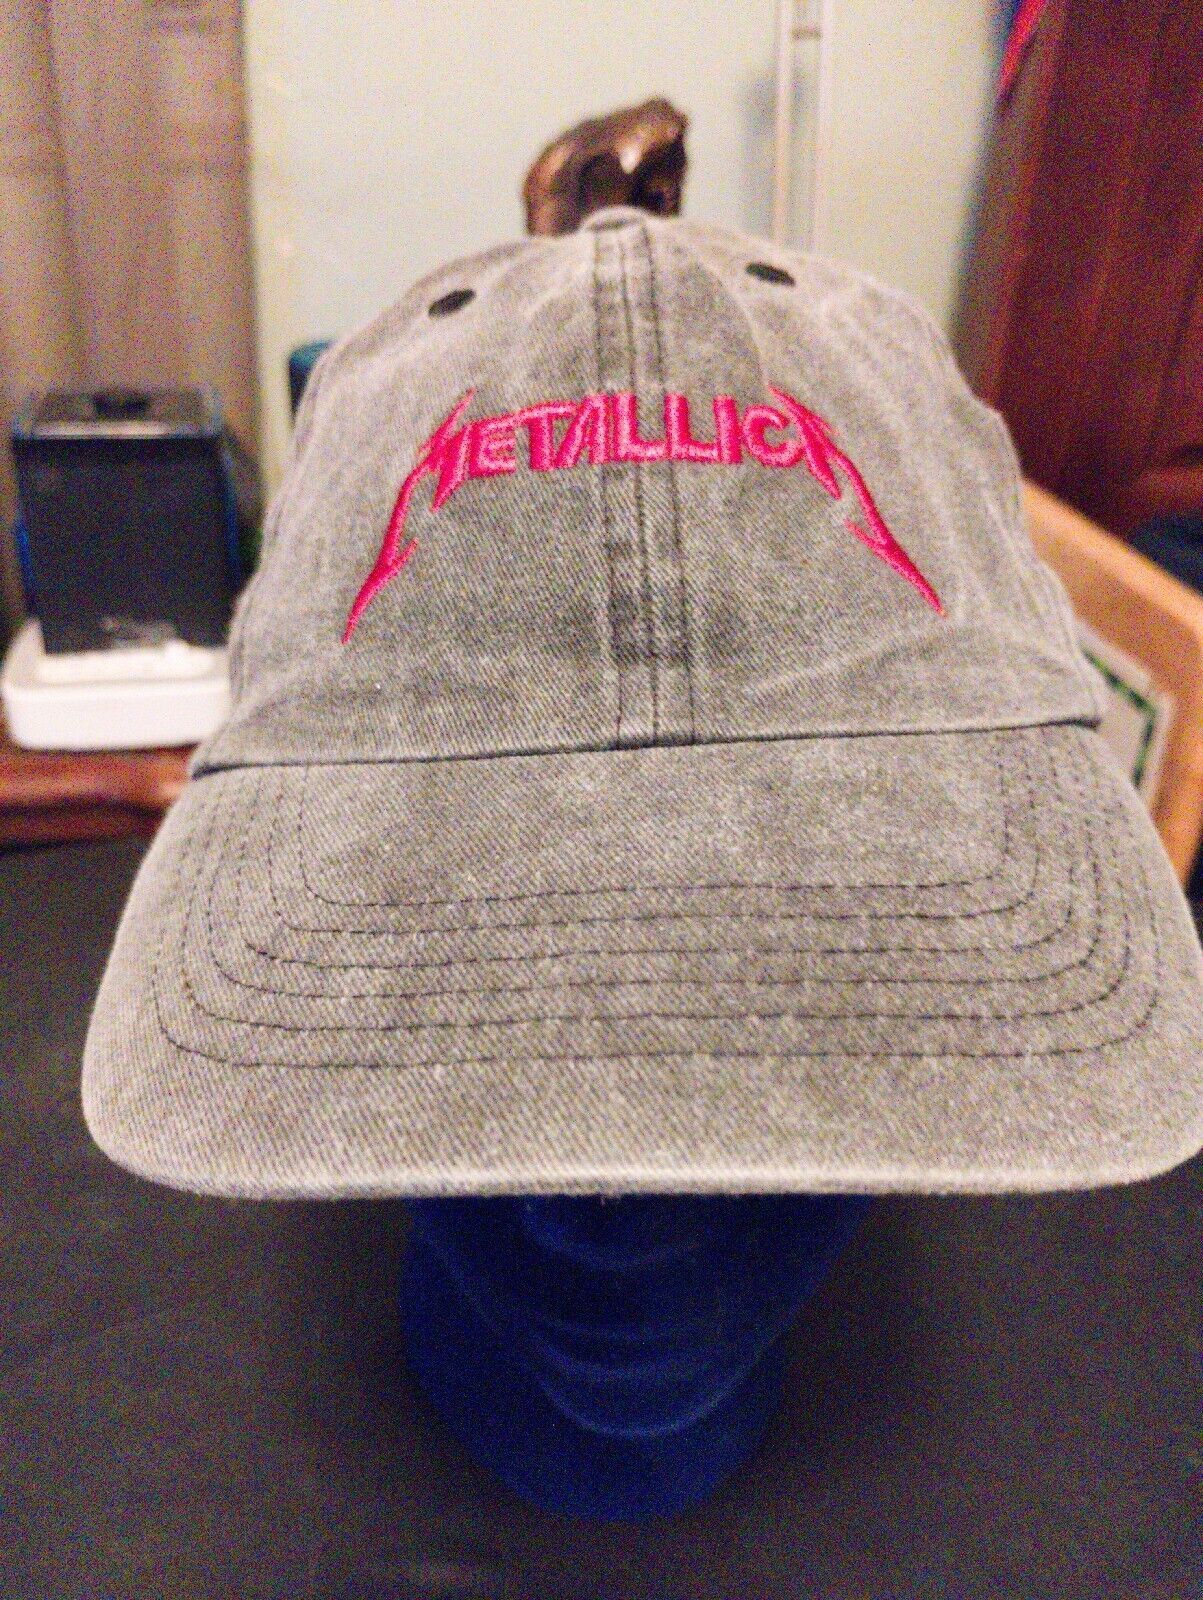 Metallica Cap H&M Fading Spell Out Logo Embroidered 2016 RARE - $48.50